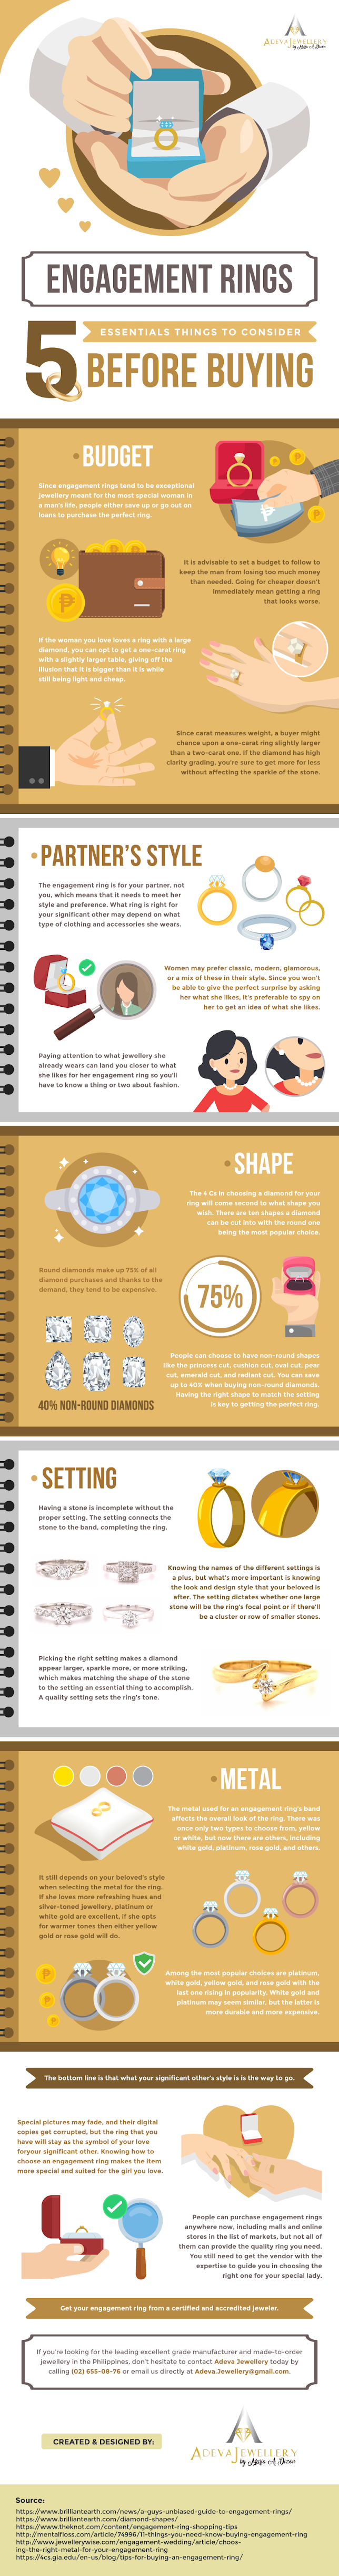 Engagement Rings – 5 Essentials Things to Consider Before Buying #infographic